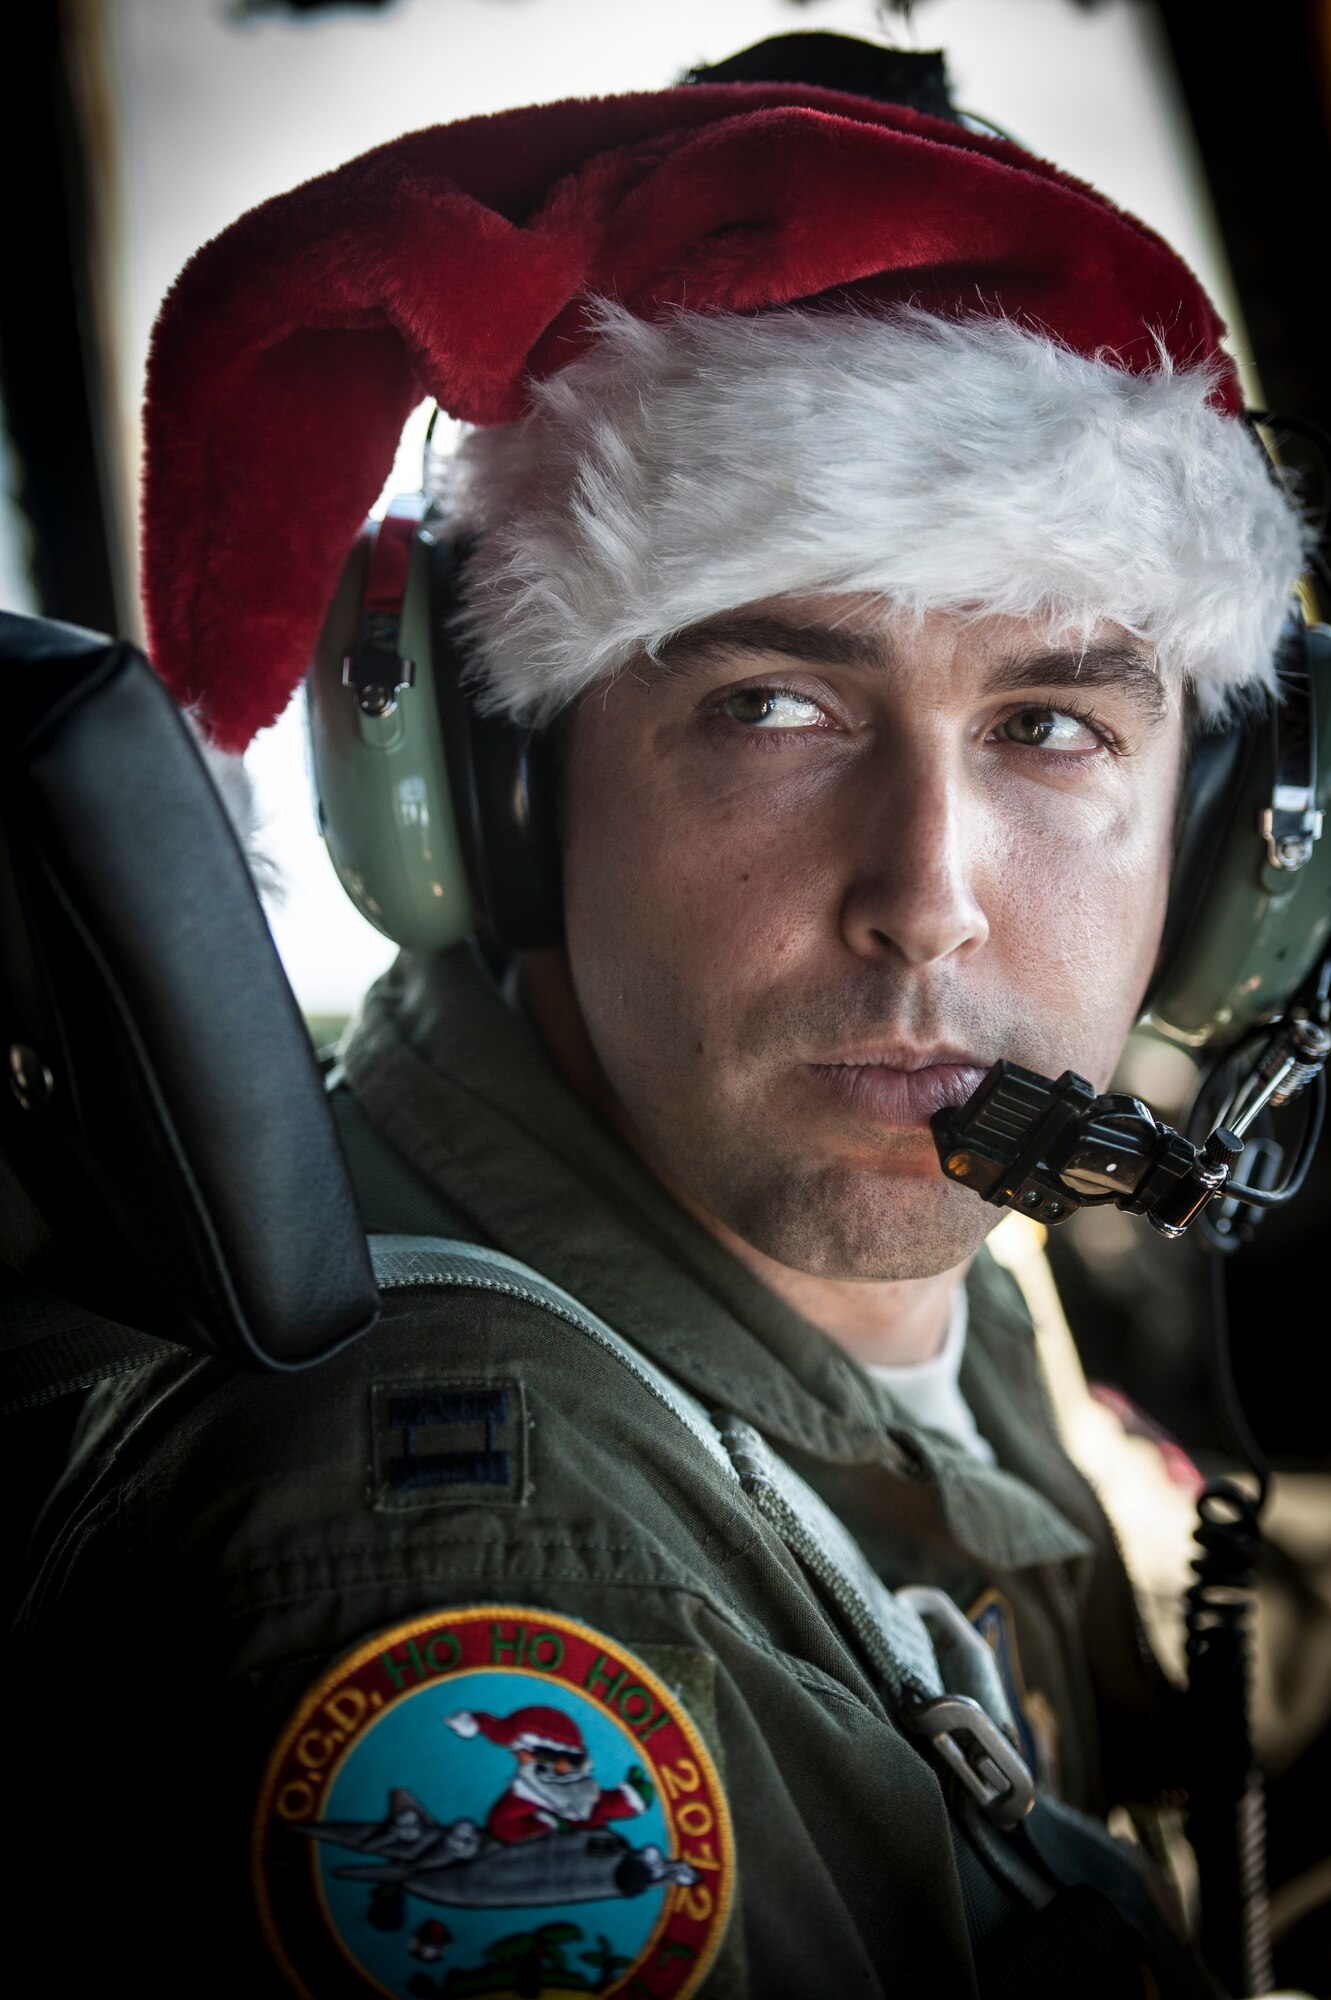 OVER THE PACIFIC OCEAN -- Capt. Dereck Monnier, 36th Airlift Squadron pilot and aircraft commander, looks at a fellow crew member during a flight over Micronesia Dec. 18, 2012. Monnier wore a Santa hat because the flight was part of Operation Christmas Drop, a 61-year-old humanitarian airlift mission carrying donated supplies to remote islands in Micronesia. (U.S. Air Force photo by Tech. Sgt. Samuel Morse)